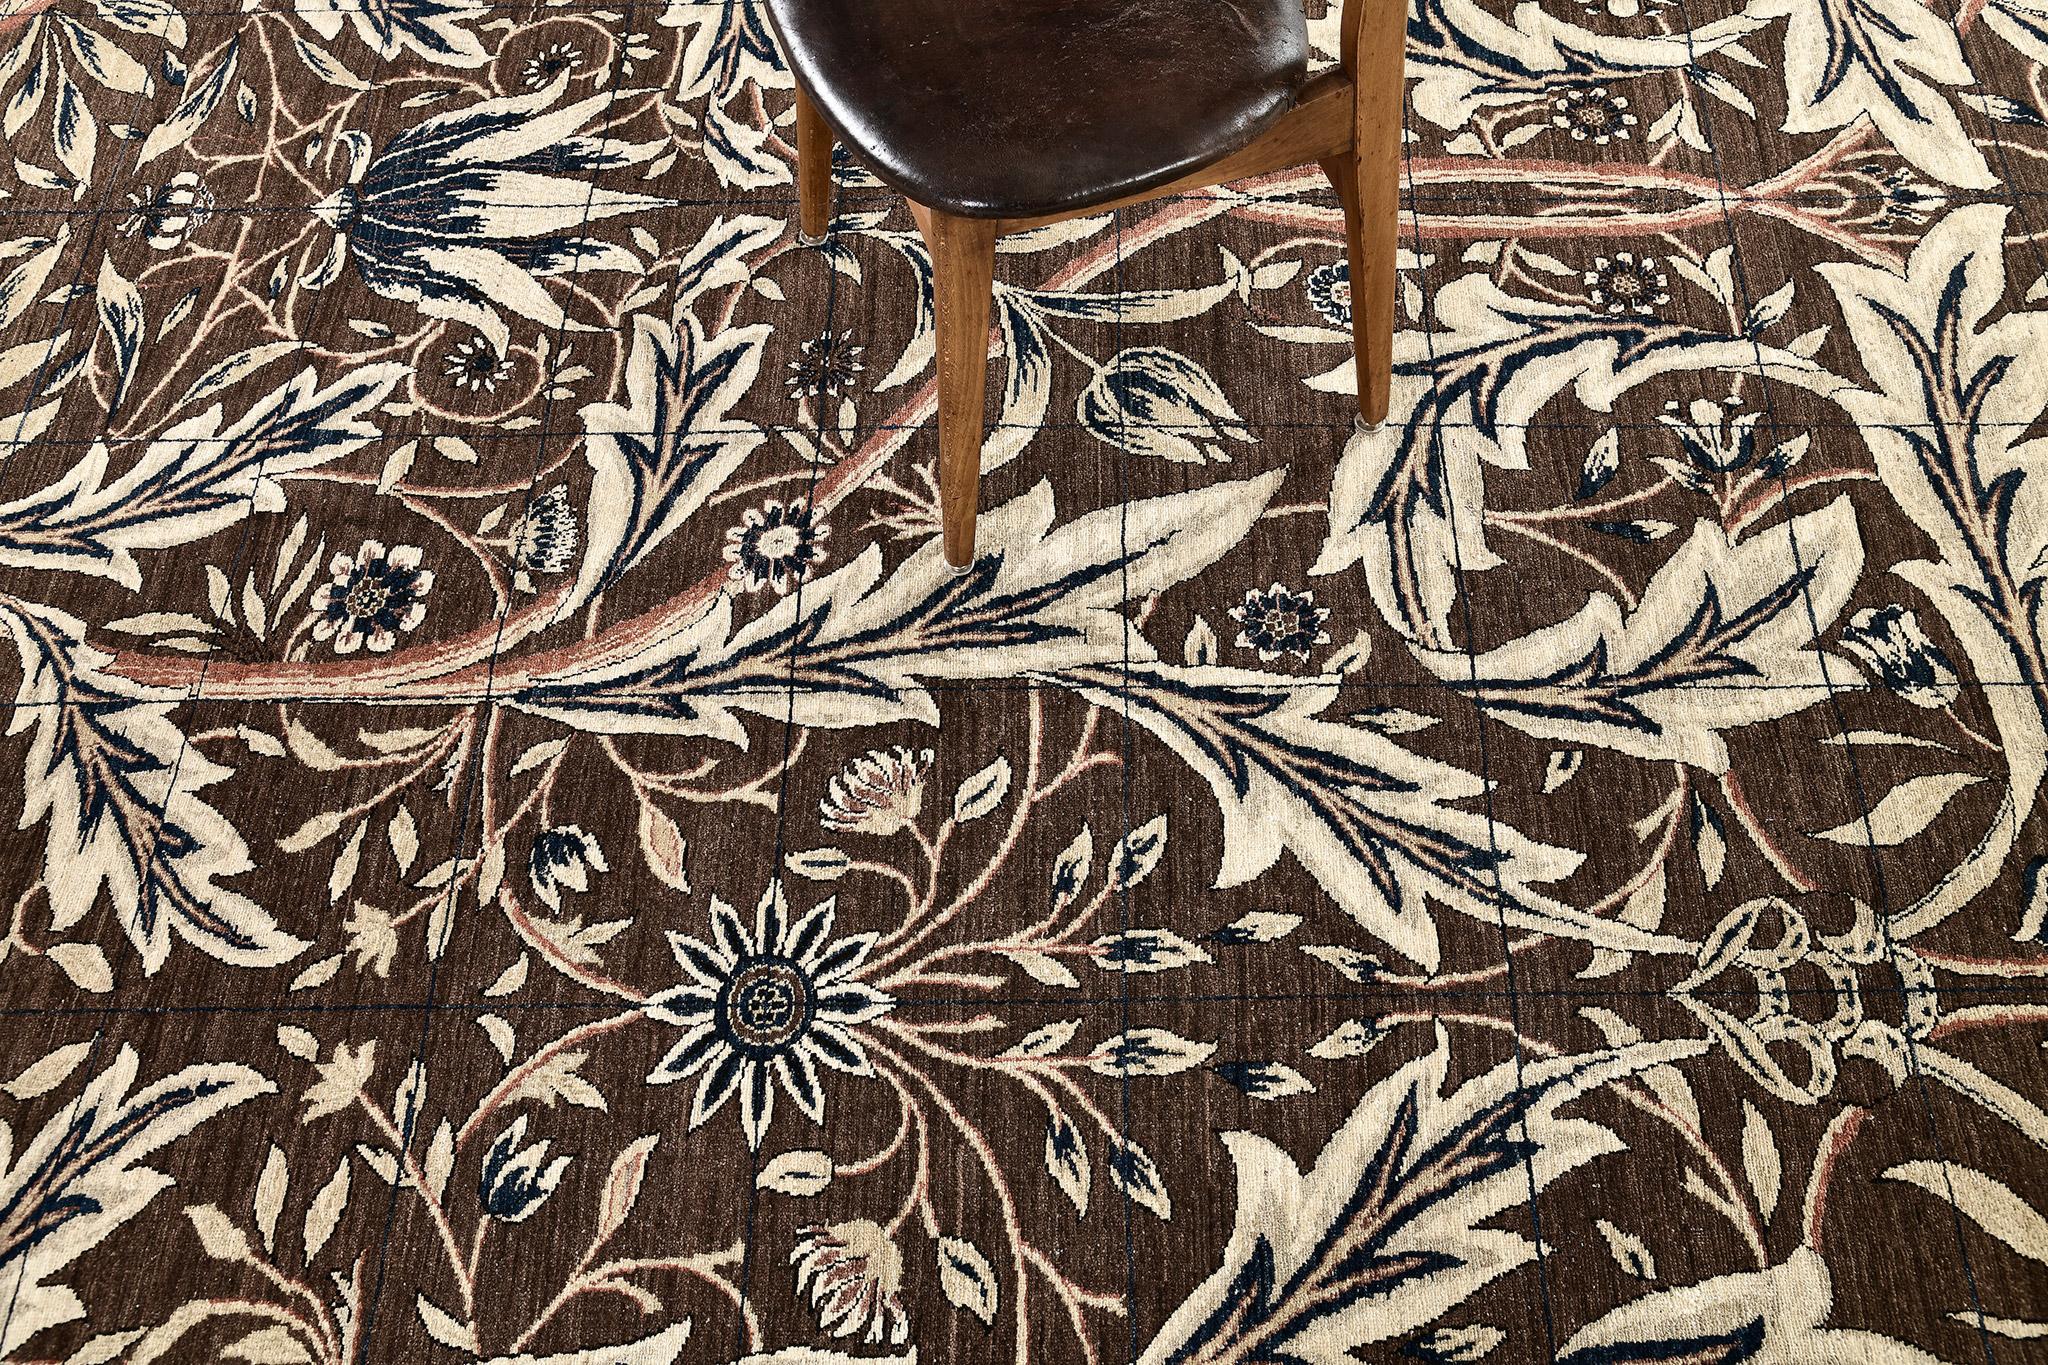 A magnificent William Morris design rug that features its naturalistic forms and bold colours. A repeating all-over nature-inspired foliate pattern composed of densely intertwined acanthus leaves rhythmically spread across the field. This piece